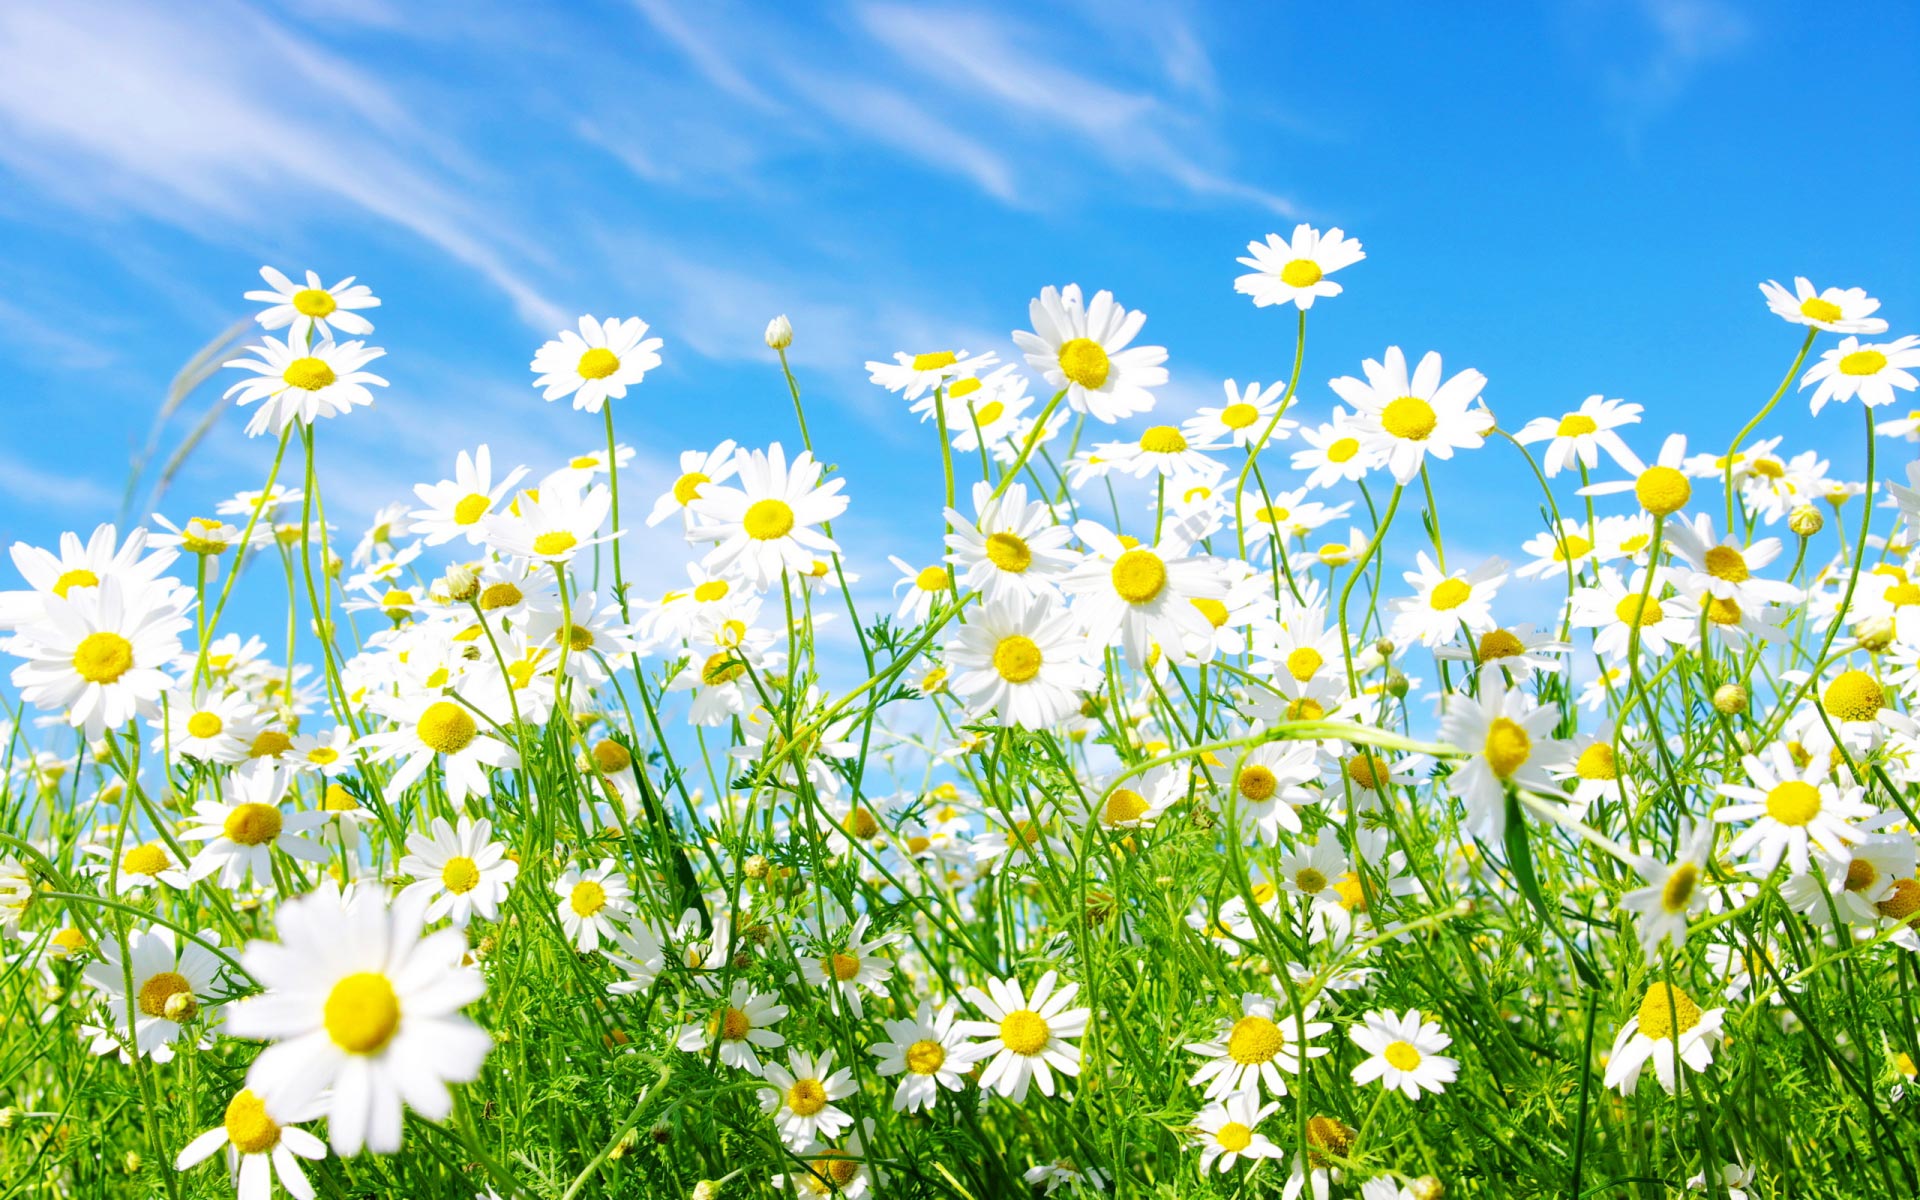 Desktop Background For Spring Which Is Under The